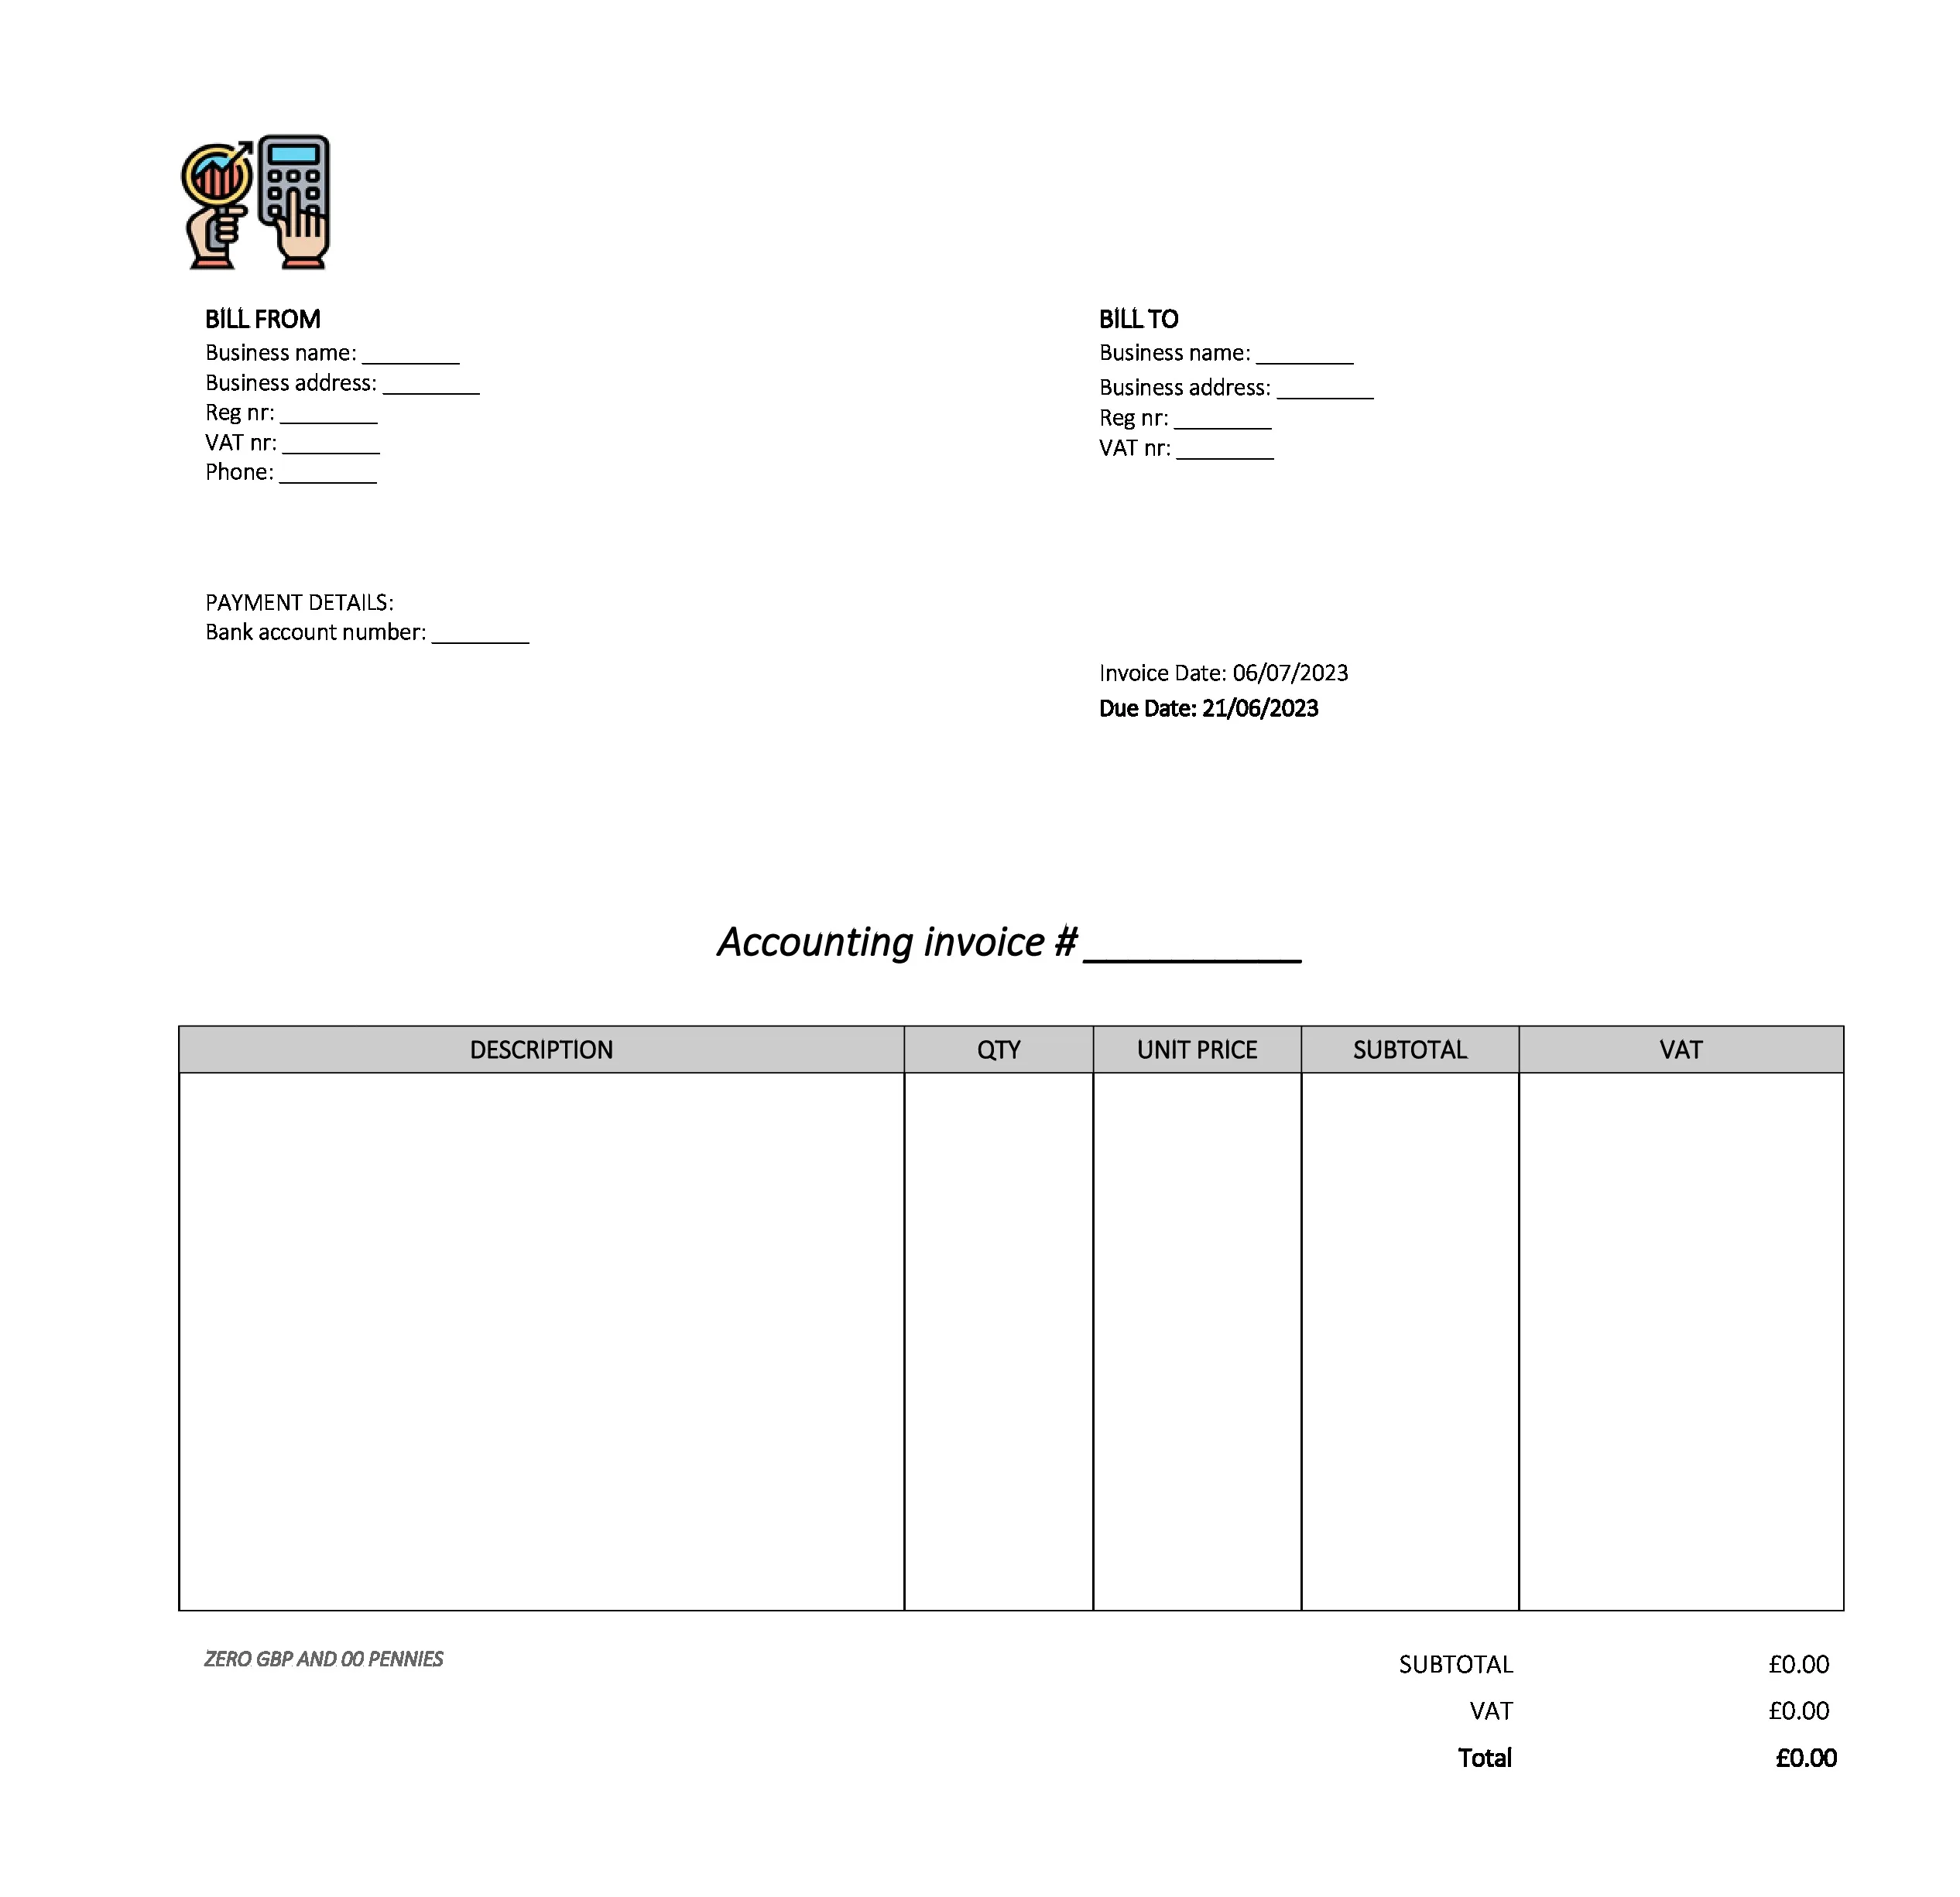 empty accounting invoice template UK Excel / Google sheets